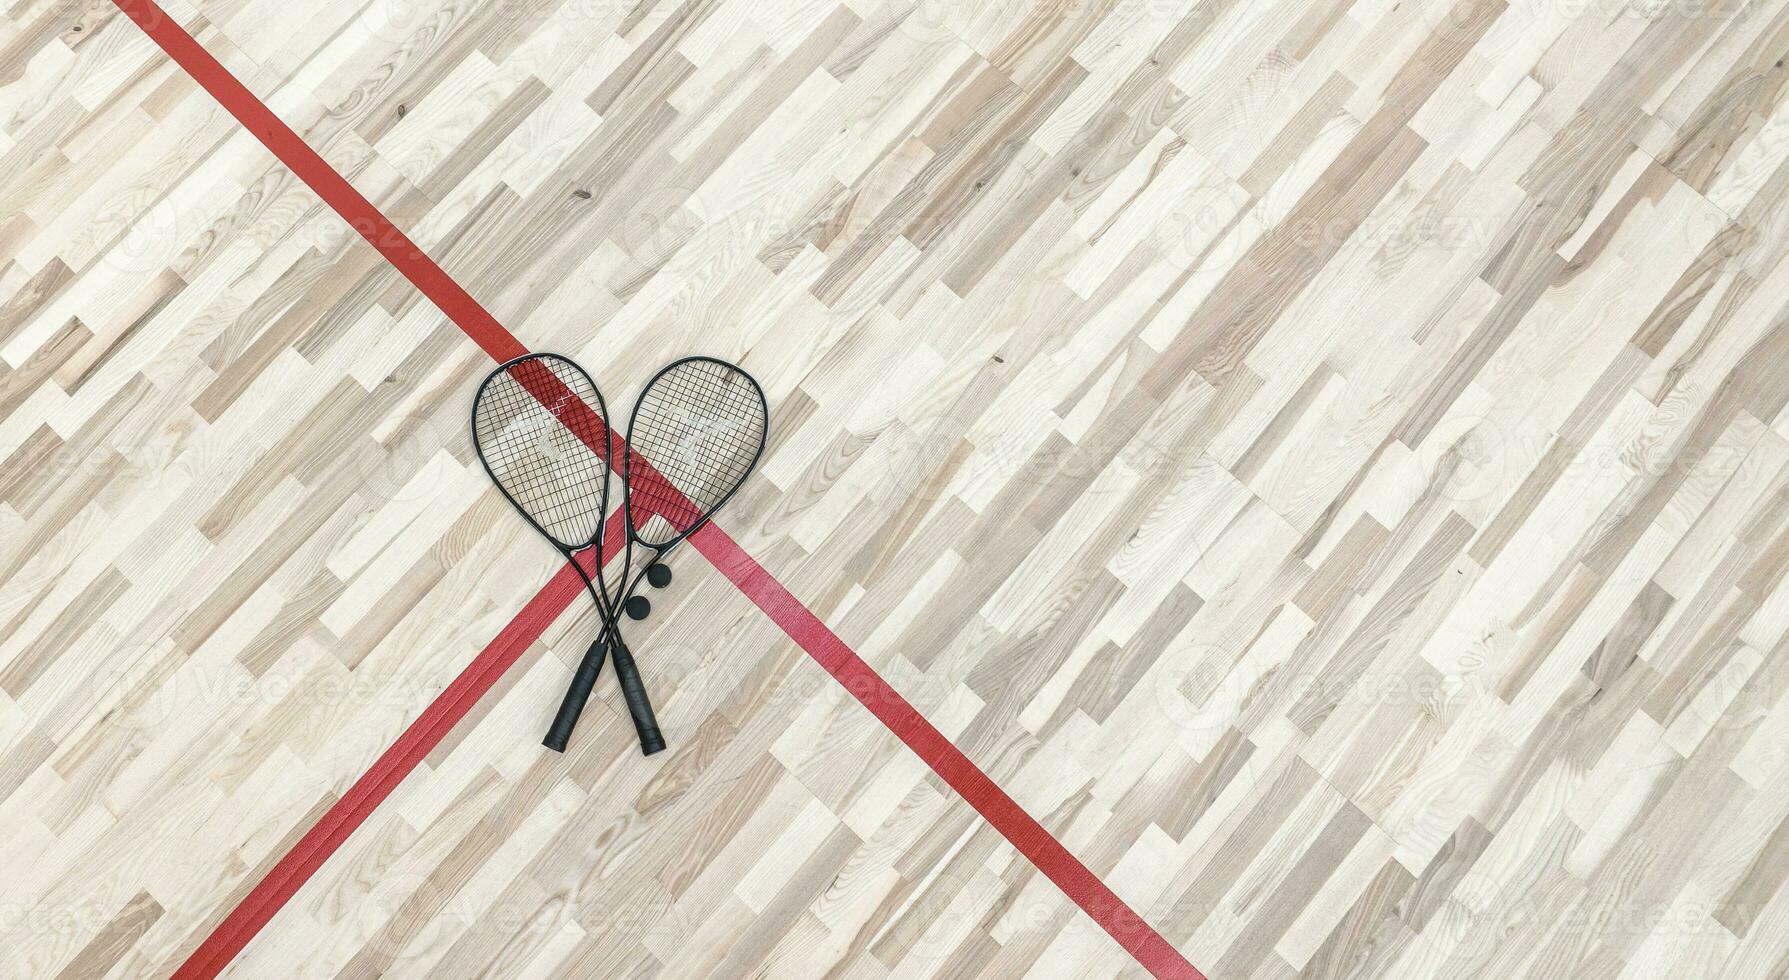 Squash Court Wooden Floor and Balls and the Rockets photo